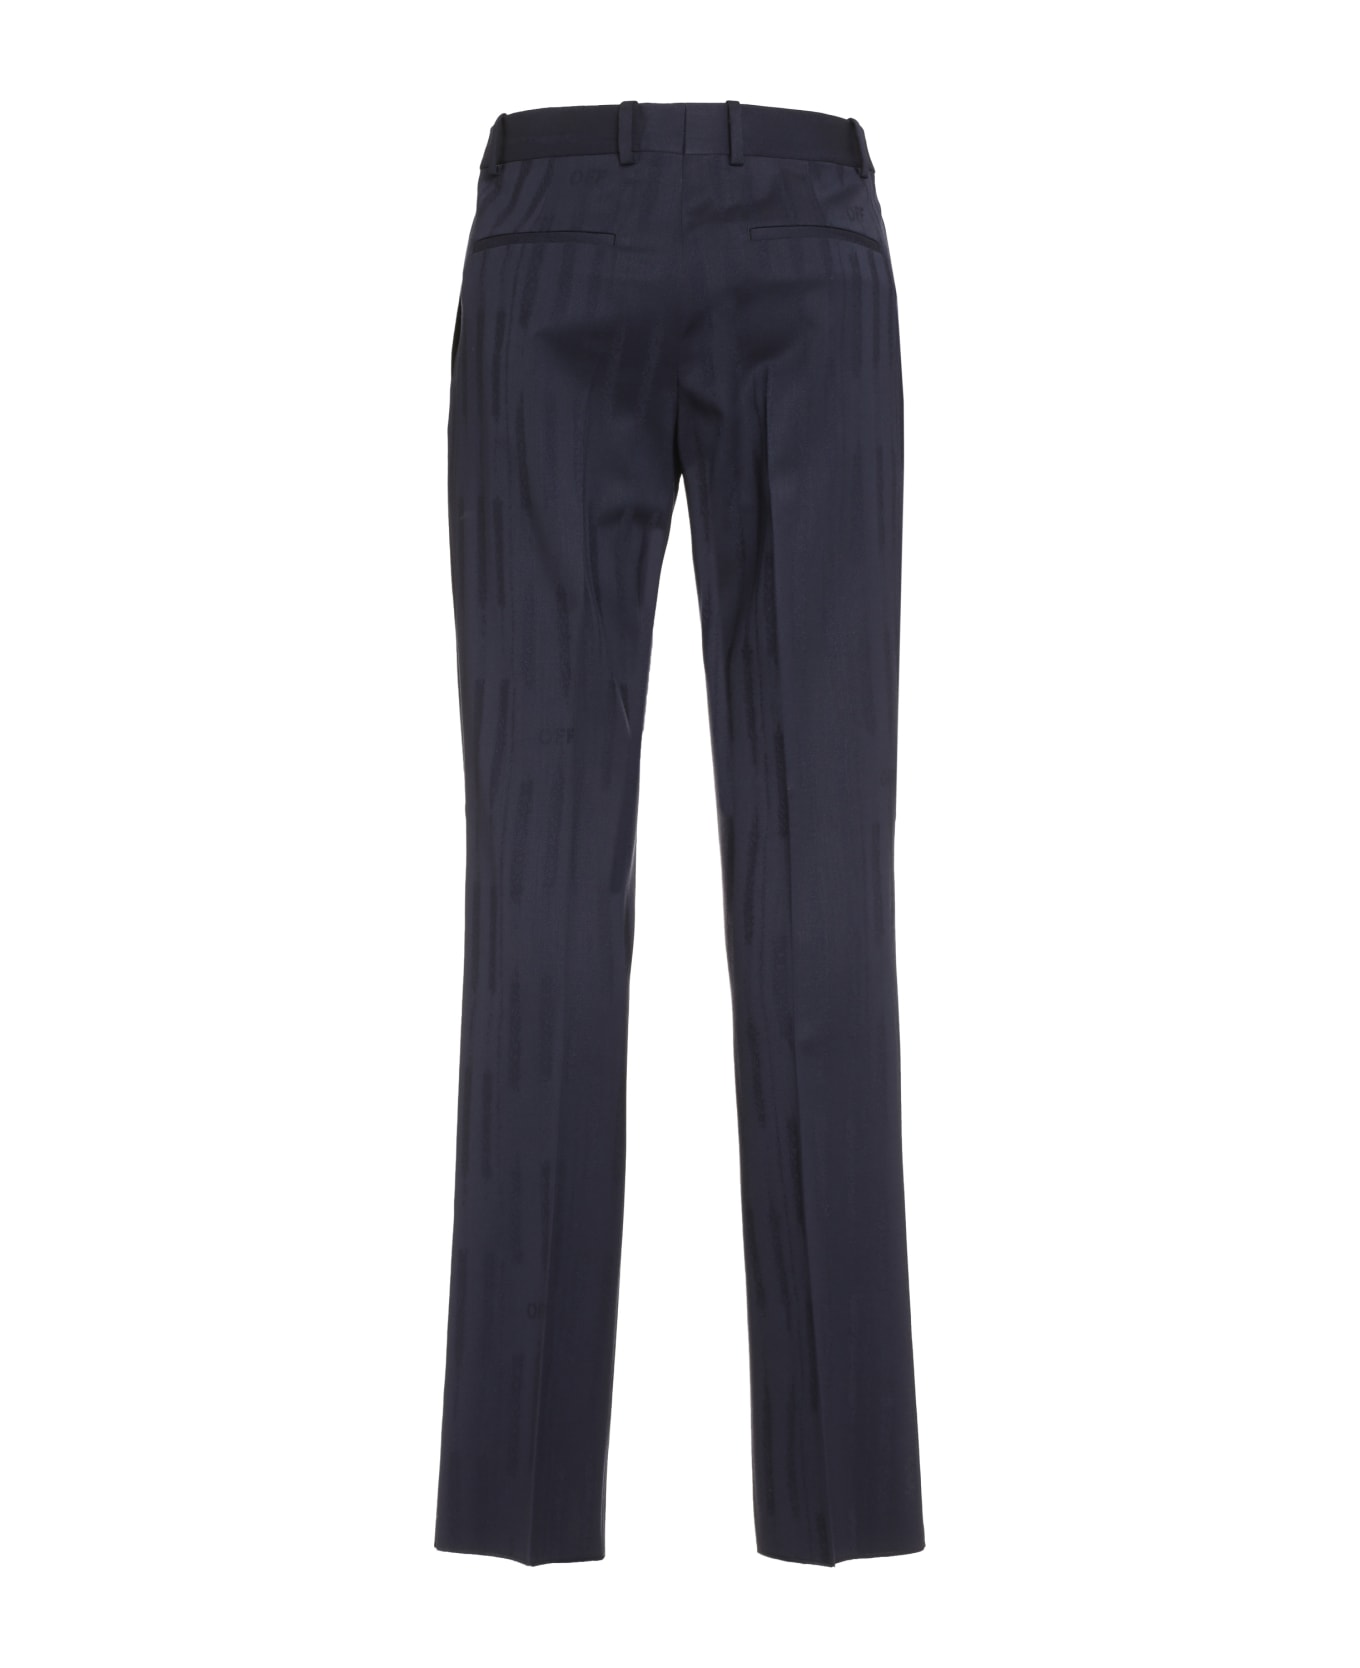 Off-White Slim Fit Tailored Trousers - blue